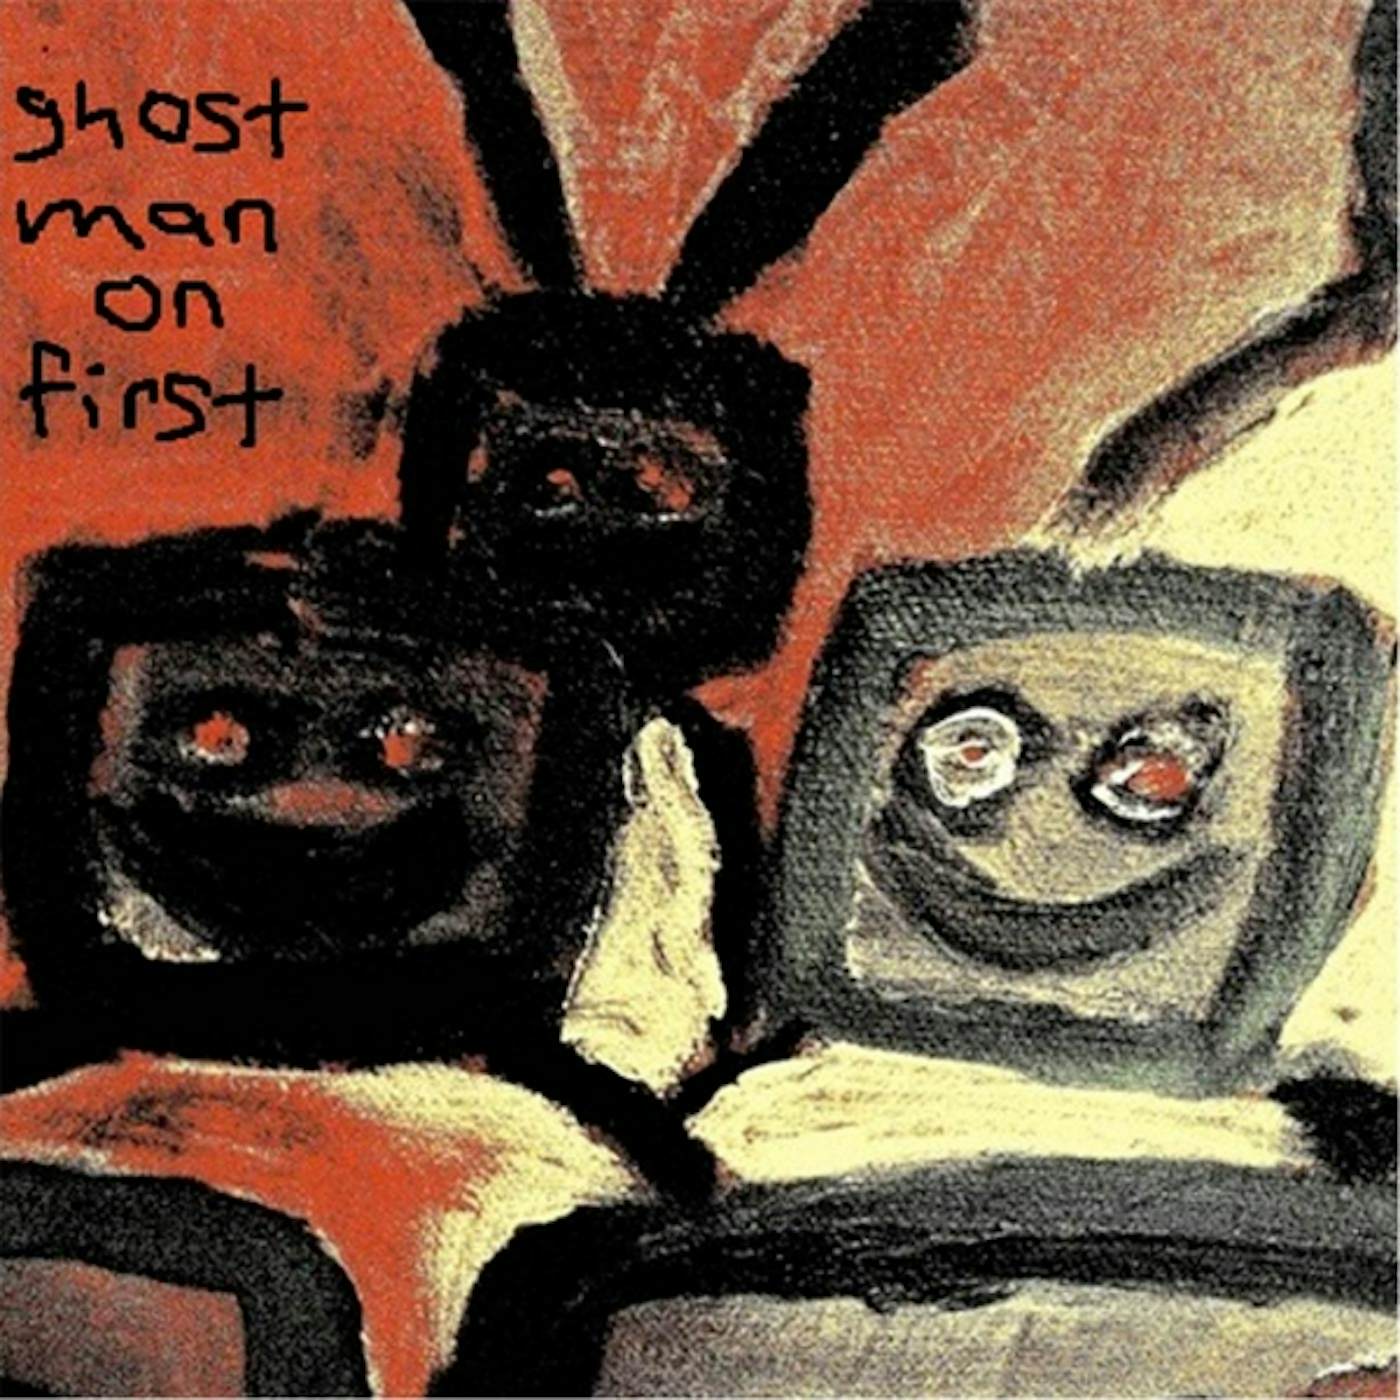 GHOST MAN ON FIRST CD